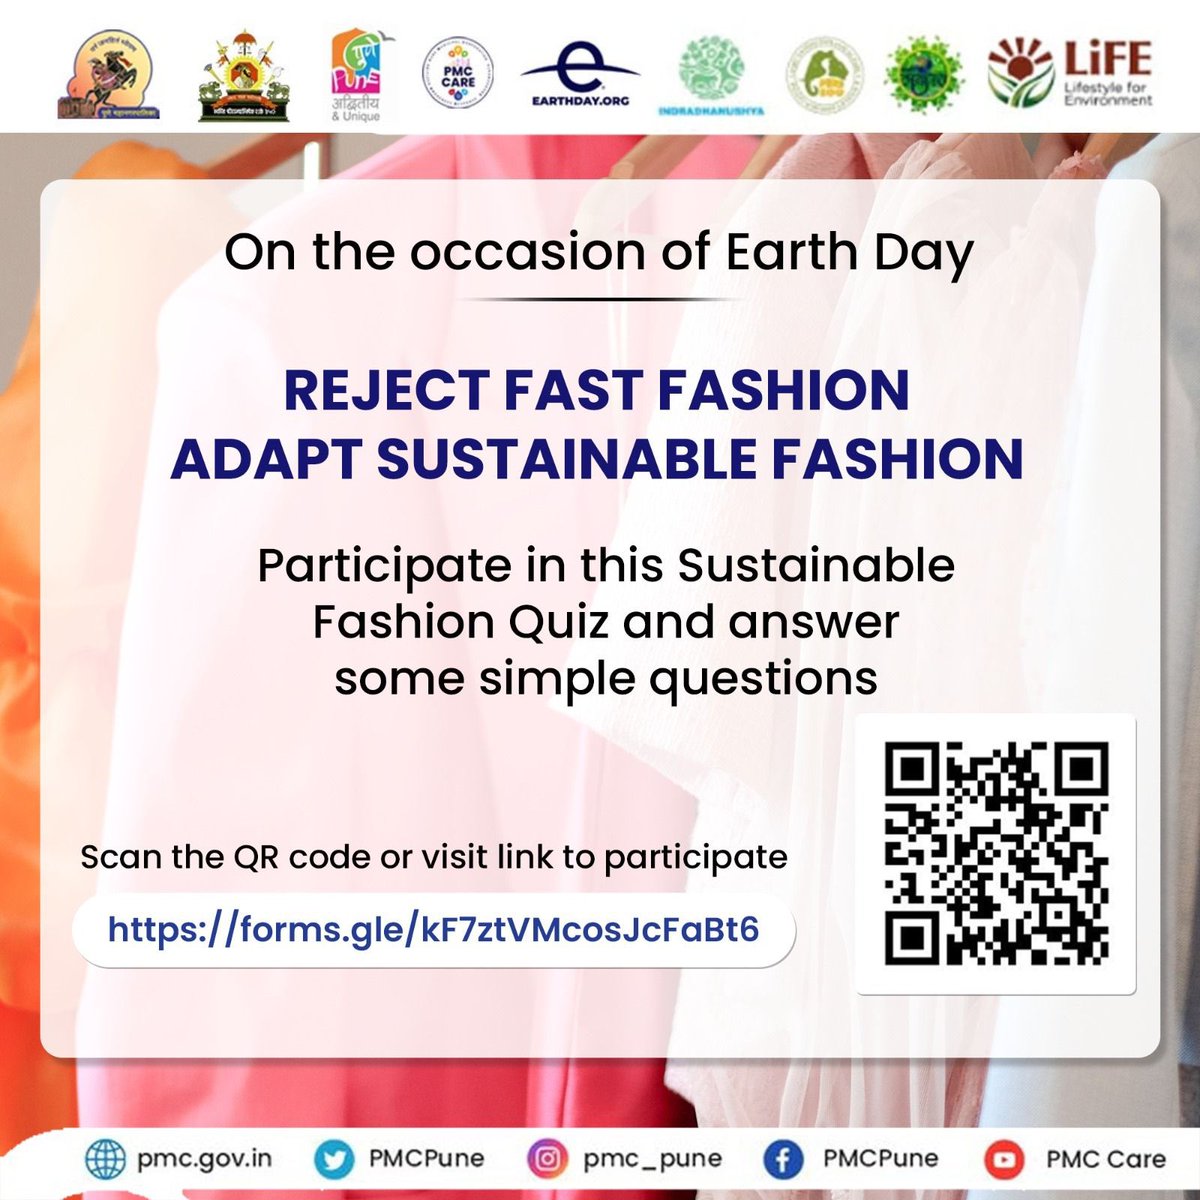 Moving towards a sustainable future! Your participation in this quiz is valuable. Scan the QR code or click on the link below to participate: forms.gle/kF7ztVMcosJcFa… #MajhiVasundhara #SayNoToPlastics #PlanetvsPlastic #EndPlastics #EarthDay #PMC